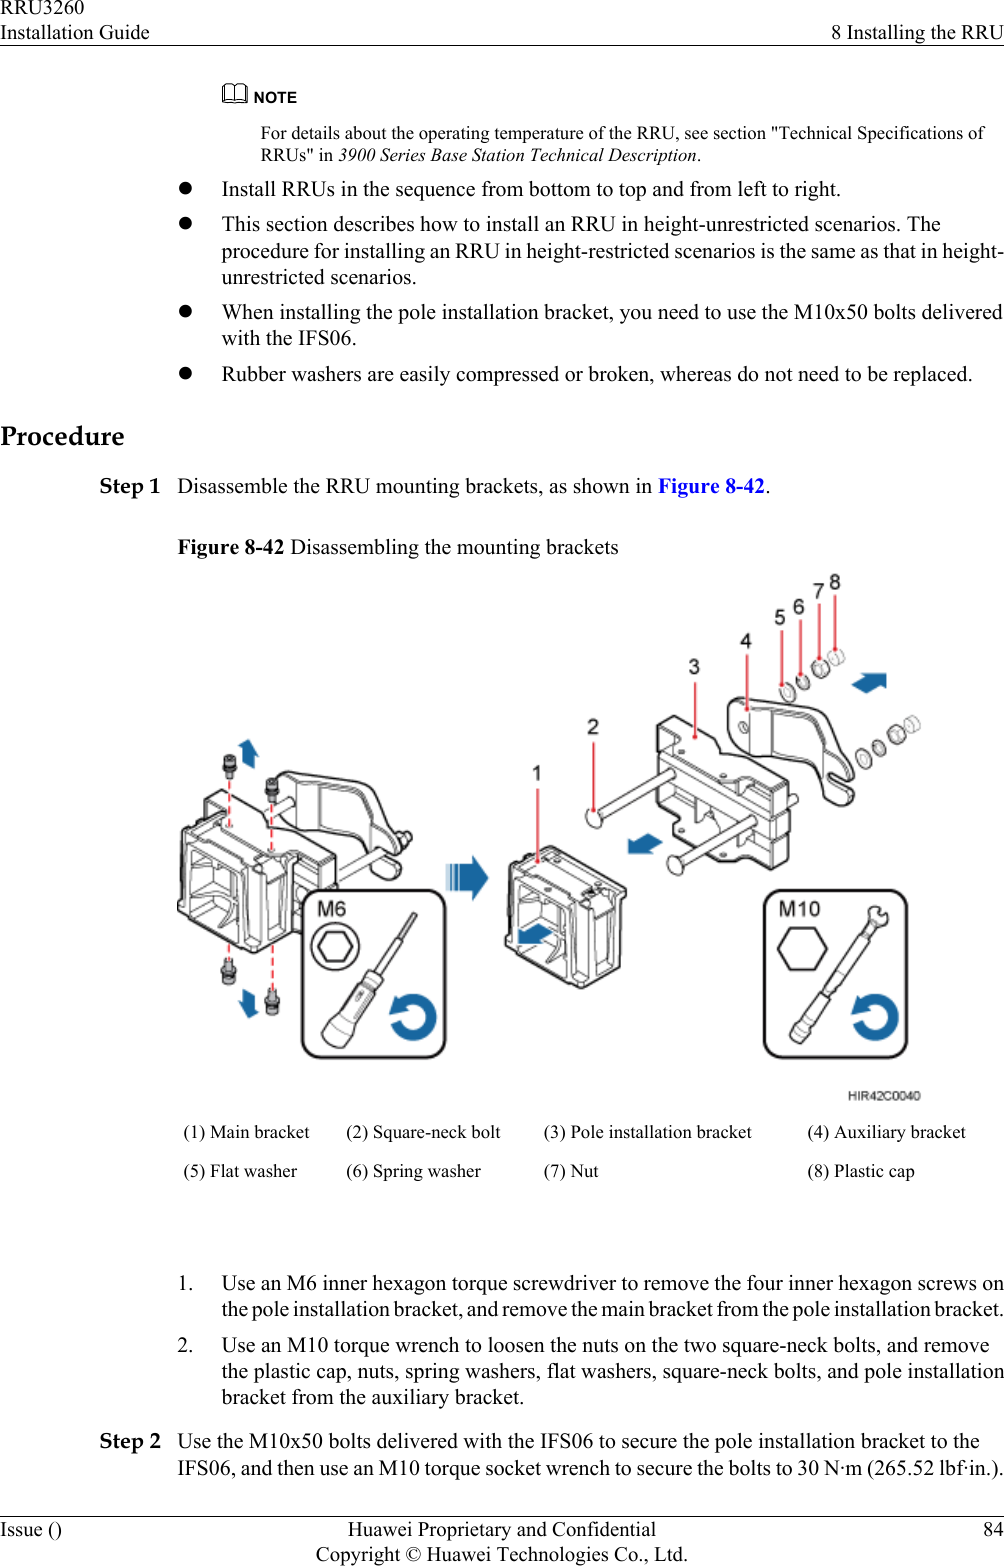 NOTEFor details about the operating temperature of the RRU, see section &quot;Technical Specifications ofRRUs&quot; in 3900 Series Base Station Technical Description.lInstall RRUs in the sequence from bottom to top and from left to right.lThis section describes how to install an RRU in height-unrestricted scenarios. Theprocedure for installing an RRU in height-restricted scenarios is the same as that in height-unrestricted scenarios.lWhen installing the pole installation bracket, you need to use the M10x50 bolts deliveredwith the IFS06.lRubber washers are easily compressed or broken, whereas do not need to be replaced.ProcedureStep 1 Disassemble the RRU mounting brackets, as shown in Figure 8-42.Figure 8-42 Disassembling the mounting brackets(1) Main bracket (2) Square-neck bolt (3) Pole installation bracket (4) Auxiliary bracket(5) Flat washer (6) Spring washer (7) Nut (8) Plastic cap 1. Use an M6 inner hexagon torque screwdriver to remove the four inner hexagon screws onthe pole installation bracket, and remove the main bracket from the pole installation bracket.2. Use an M10 torque wrench to loosen the nuts on the two square-neck bolts, and removethe plastic cap, nuts, spring washers, flat washers, square-neck bolts, and pole installationbracket from the auxiliary bracket.Step 2 Use the M10x50 bolts delivered with the IFS06 to secure the pole installation bracket to theIFS06, and then use an M10 torque socket wrench to secure the bolts to 30 N·m (265.52 lbf·in.).RRU3260Installation Guide 8 Installing the RRUIssue () Huawei Proprietary and ConfidentialCopyright © Huawei Technologies Co., Ltd.84